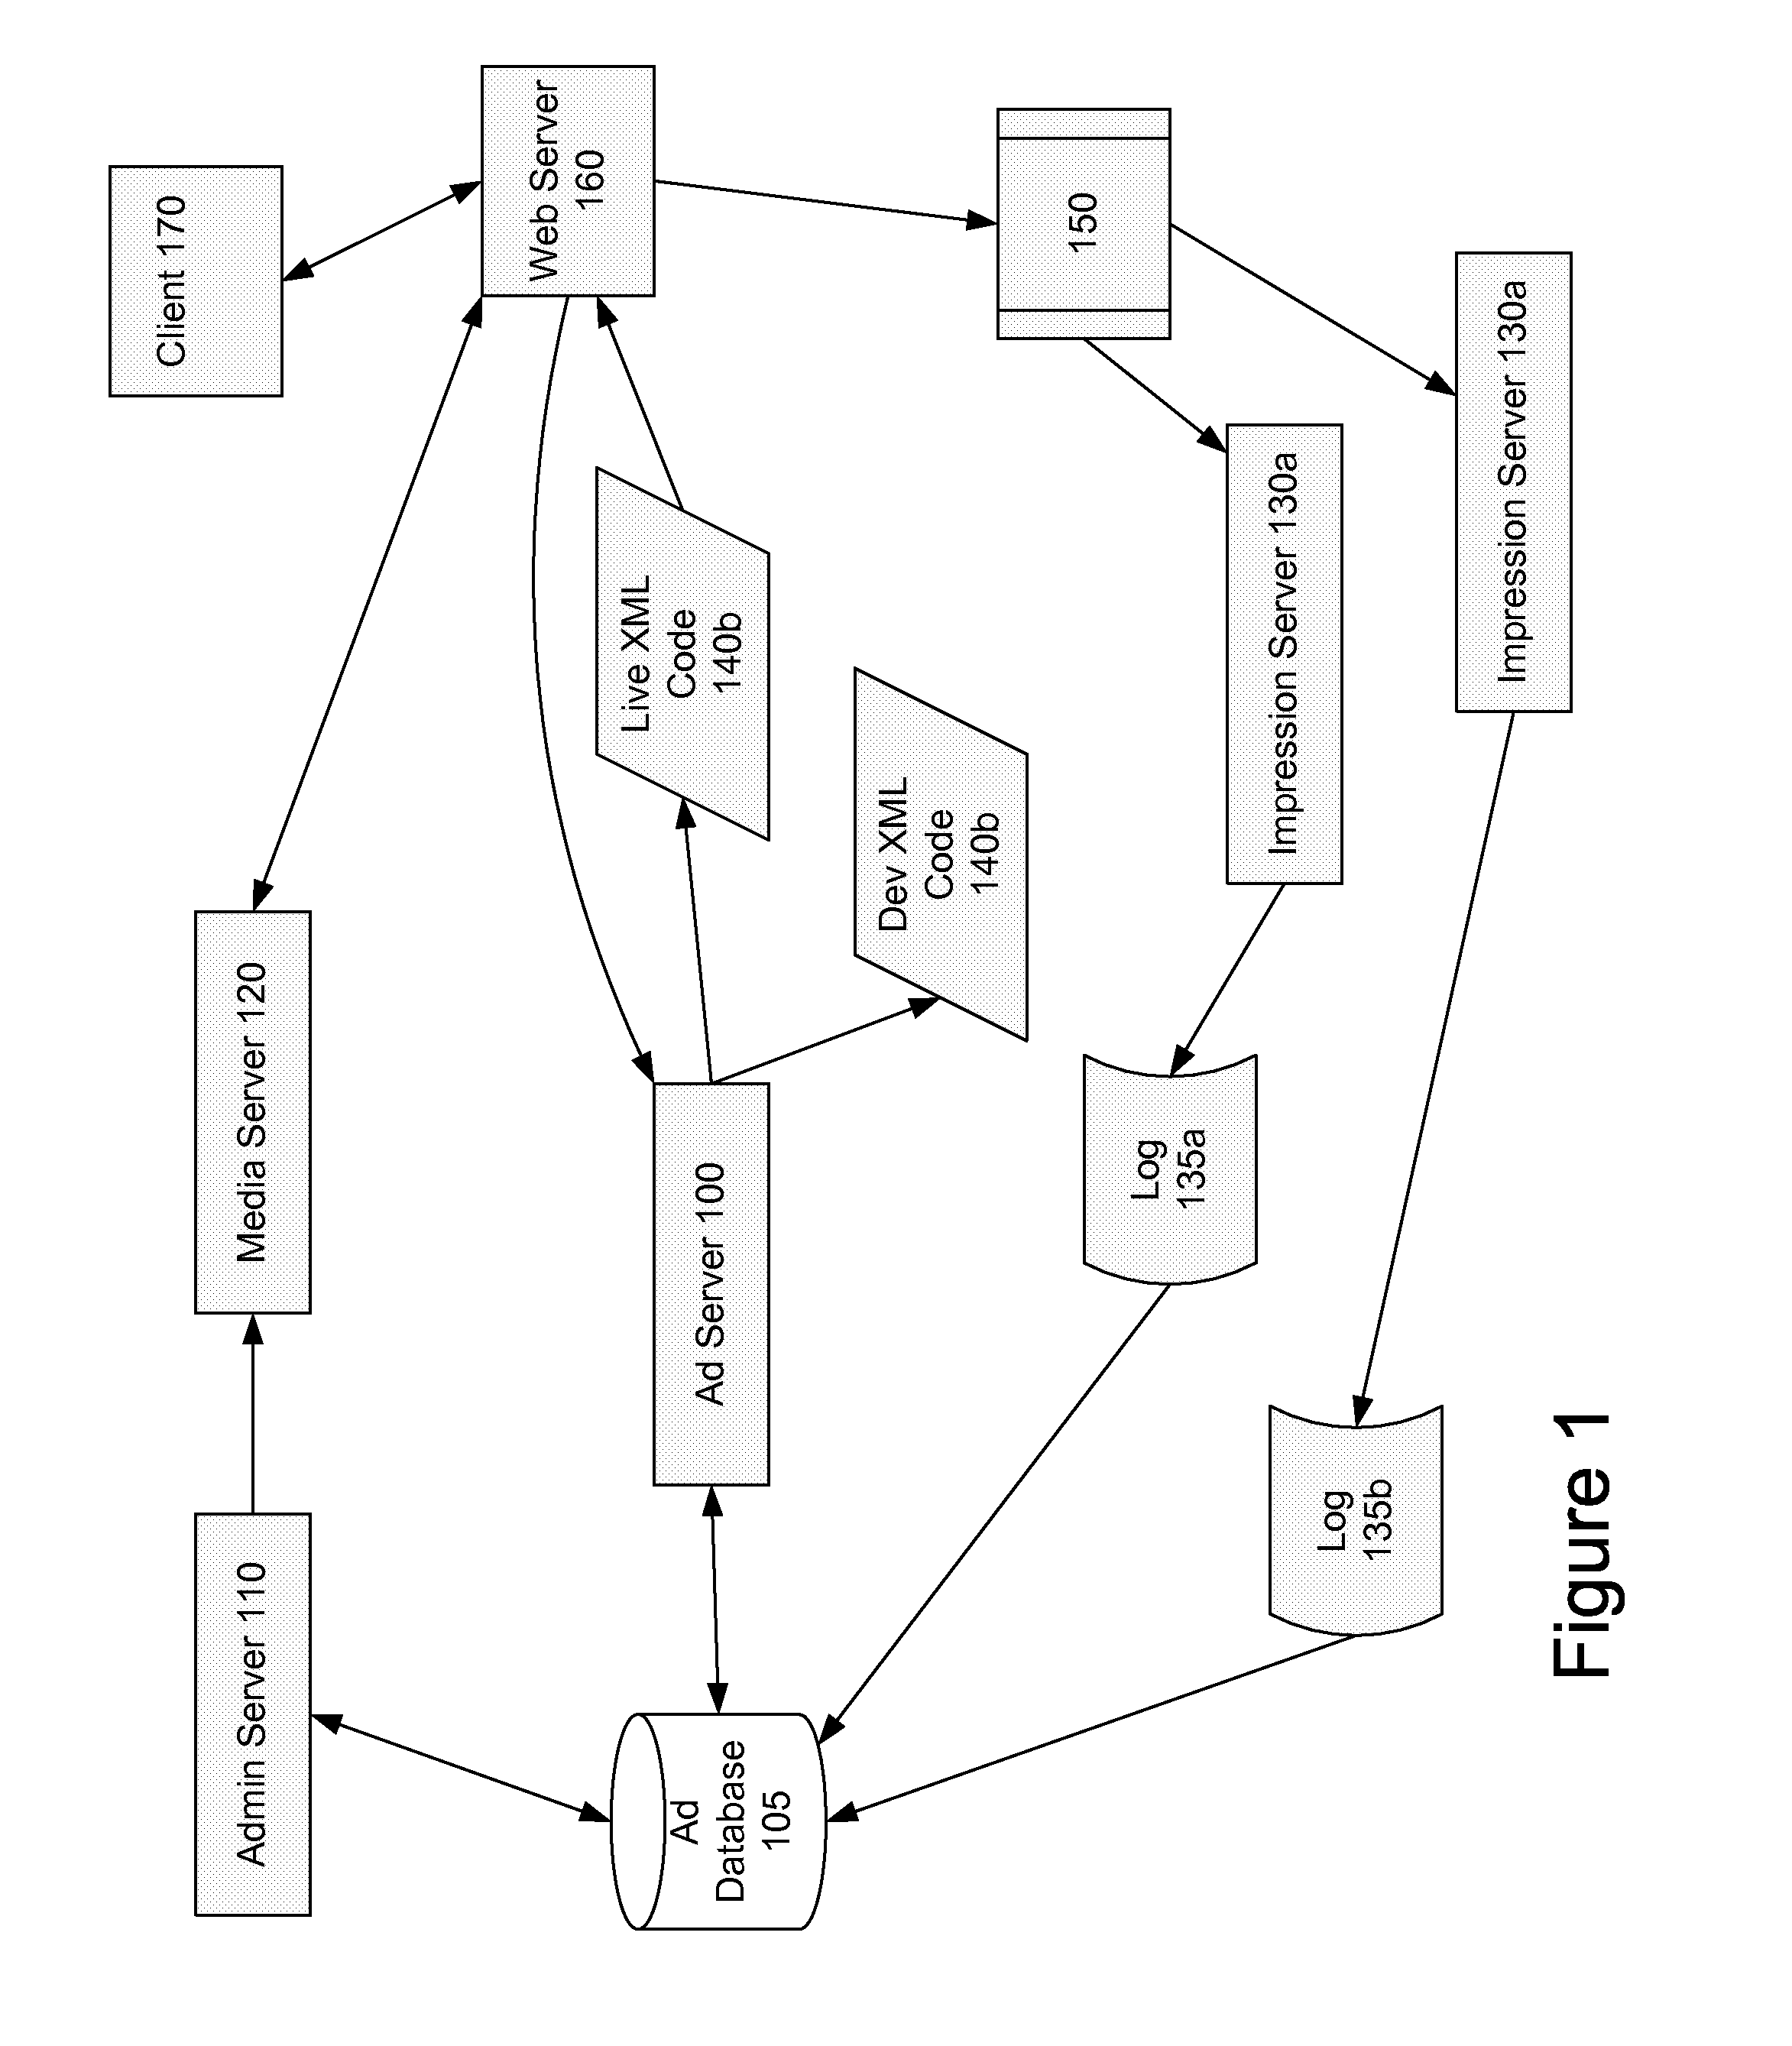 System and Method for Managing the Distribution of Advertisements for Video Content